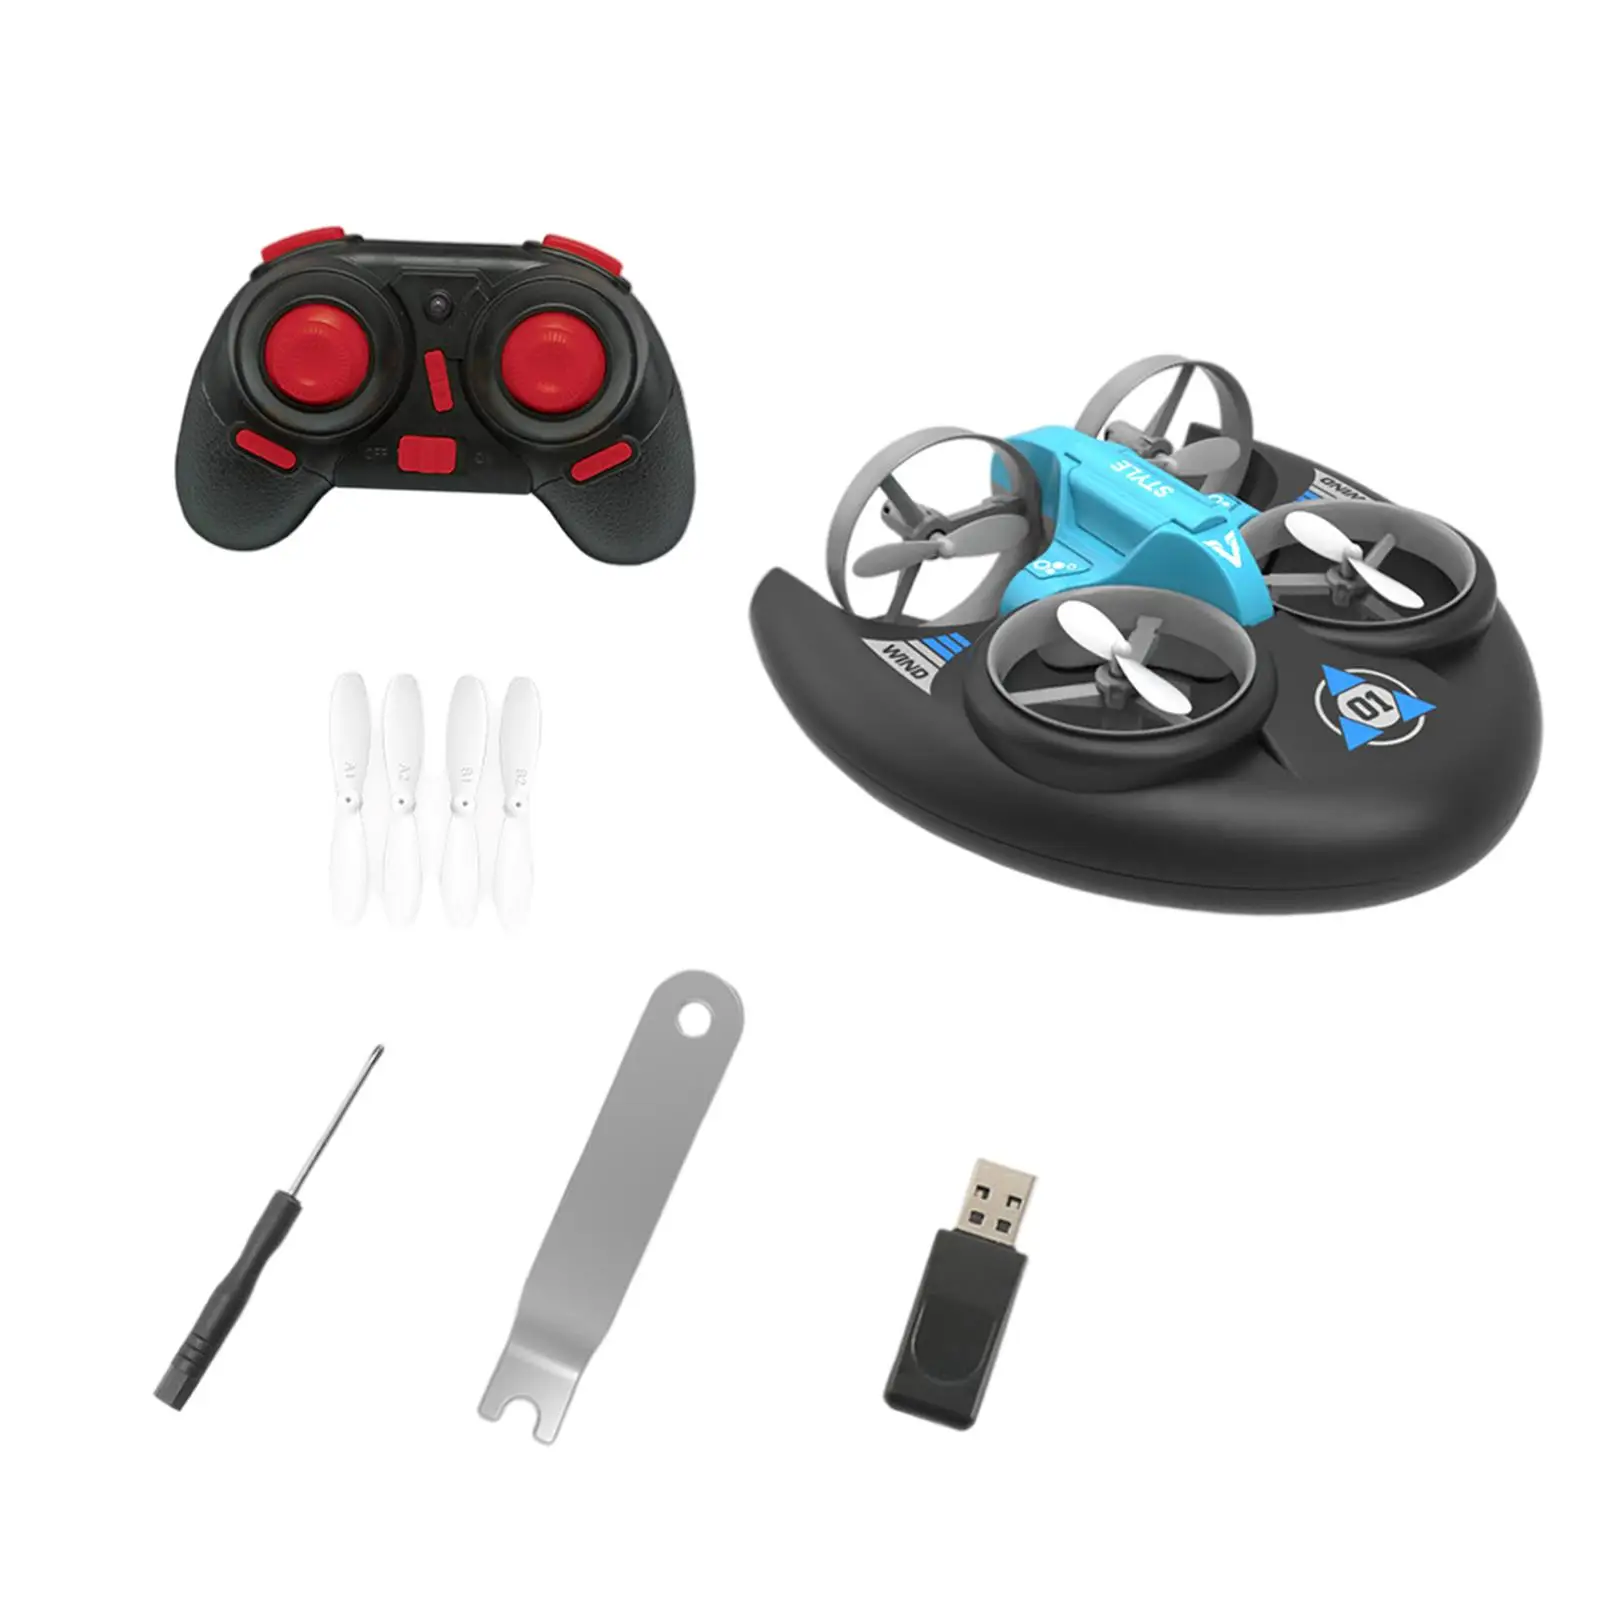 Mini , 3 Modes Rechargeable Remote Control 6CH  Mode  RC Quadcopter, Flying Hovercraft,  Year Old Boys Kids